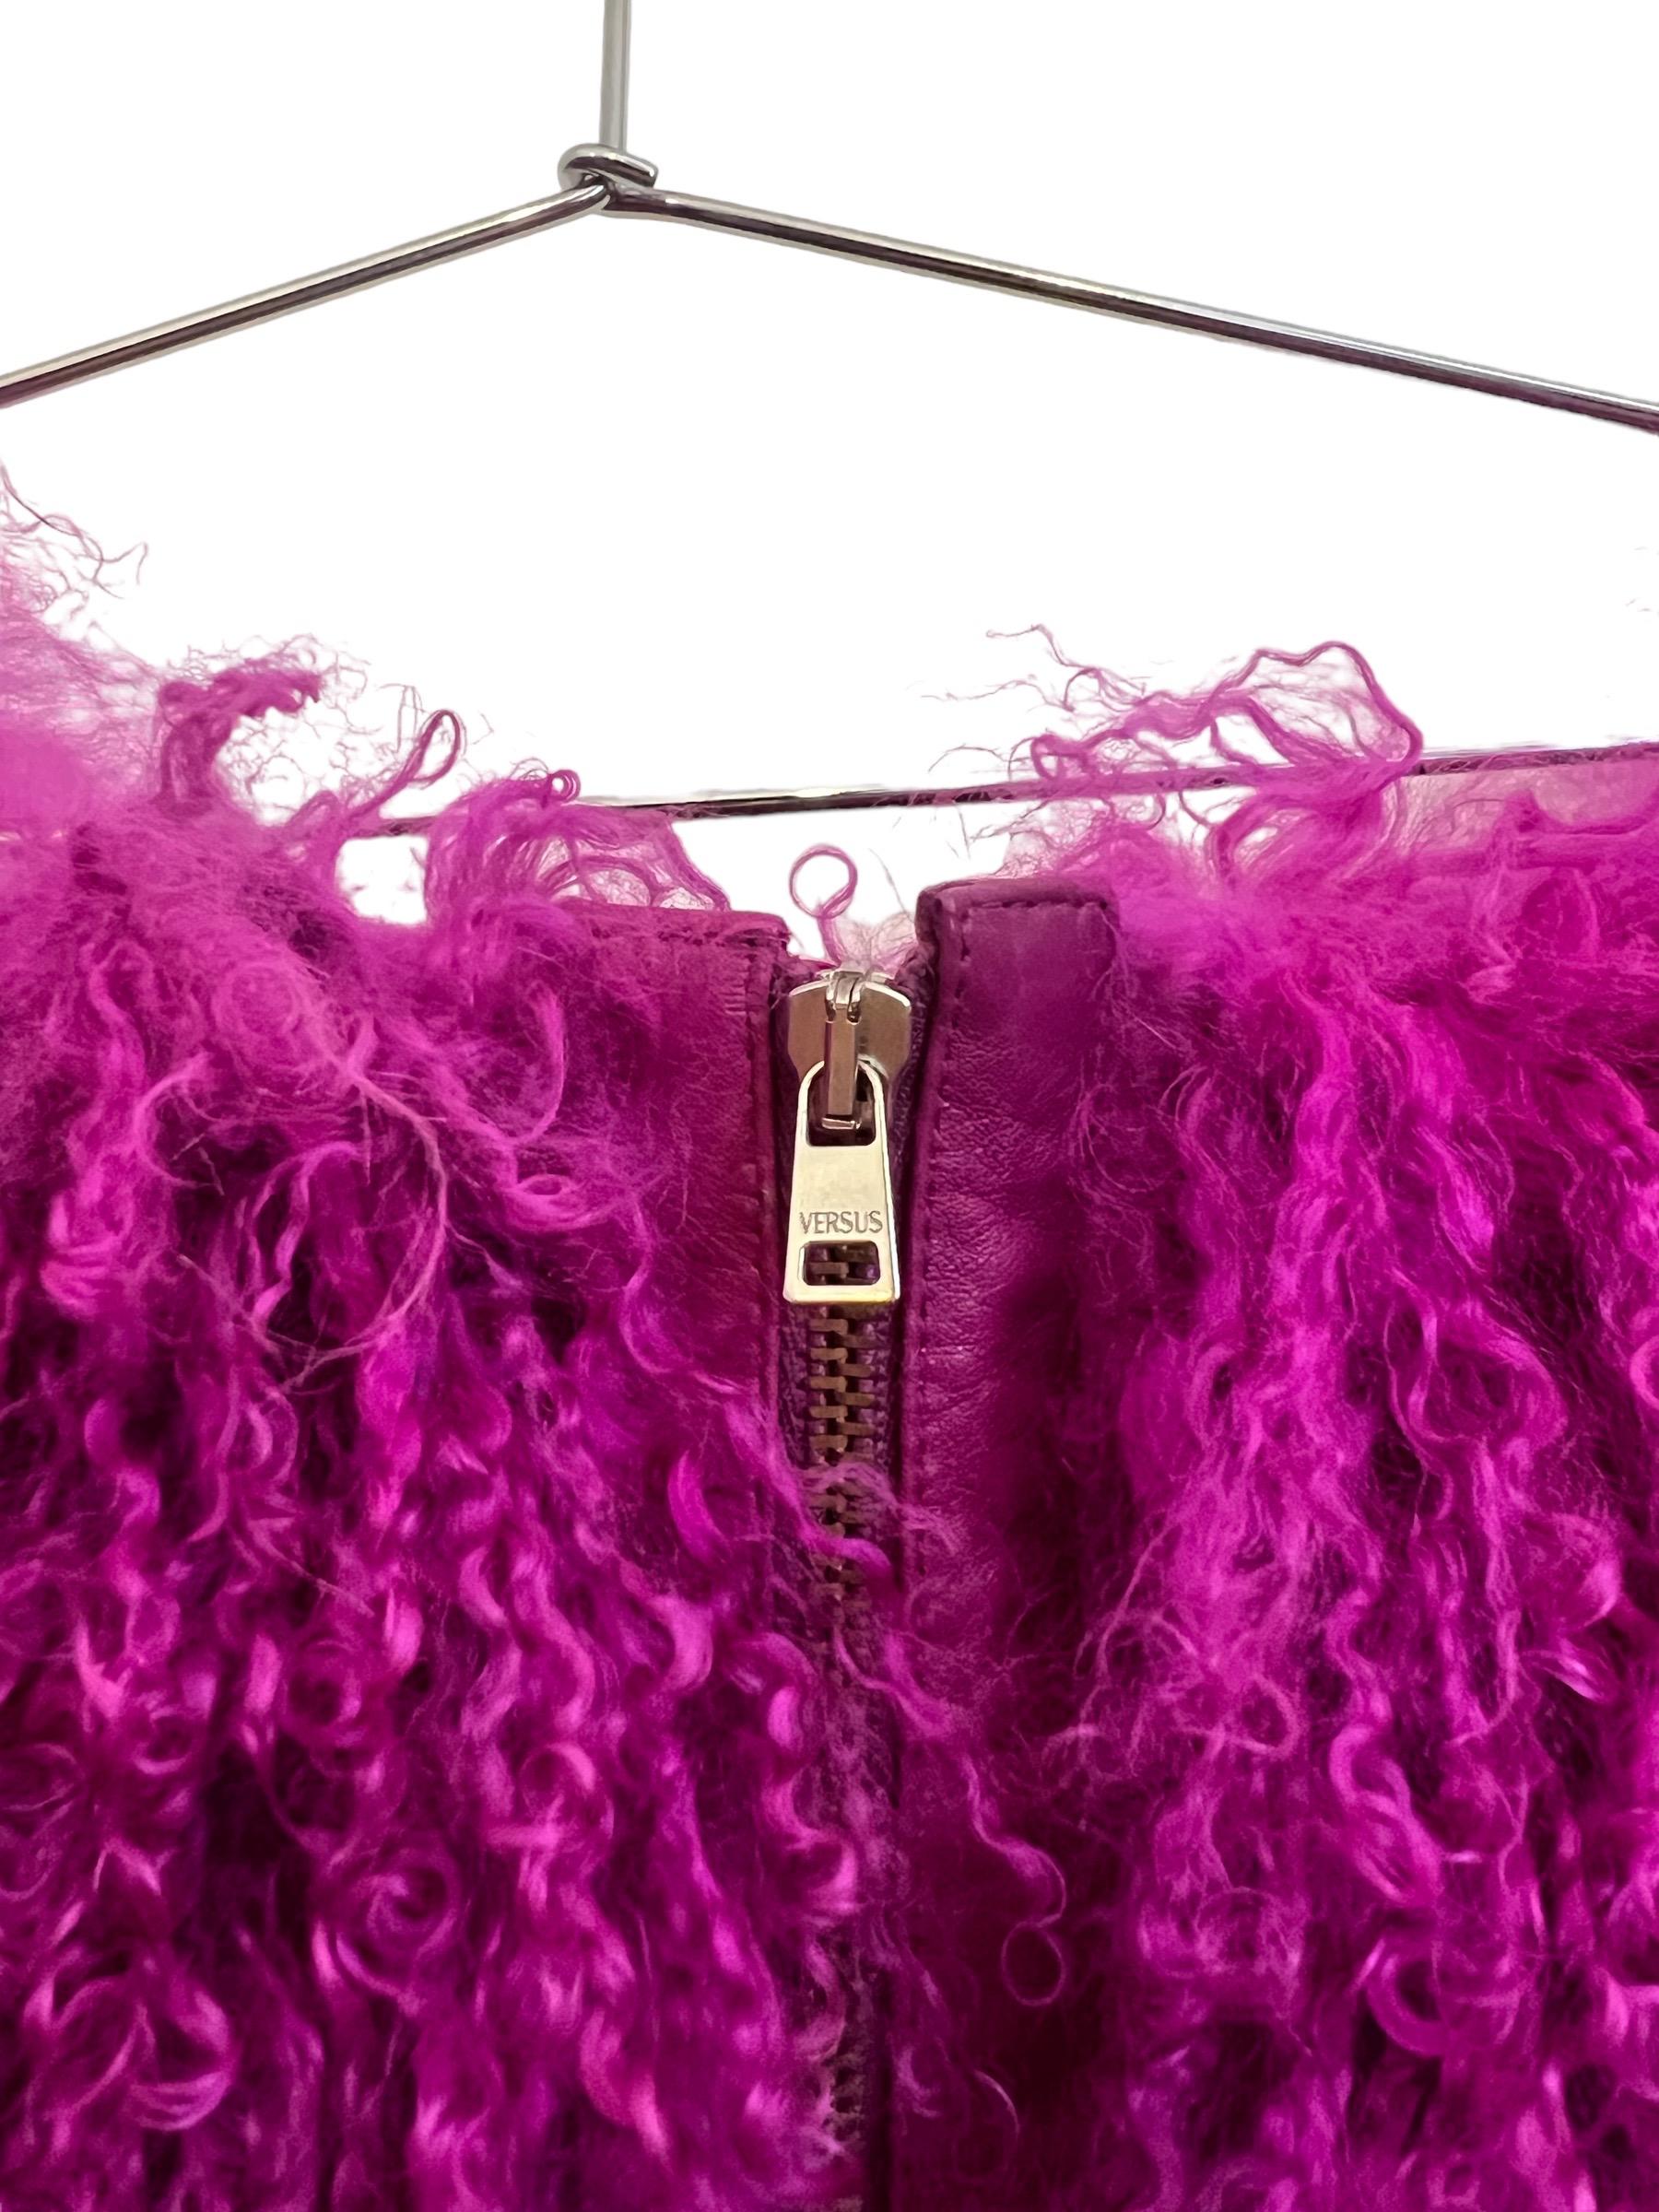 Outrageous VERSUS Versace 2012 Runway Magenta Purple Mongolian Lamb Fur Dress In Excellent Condition For Sale In Sheffield, GB